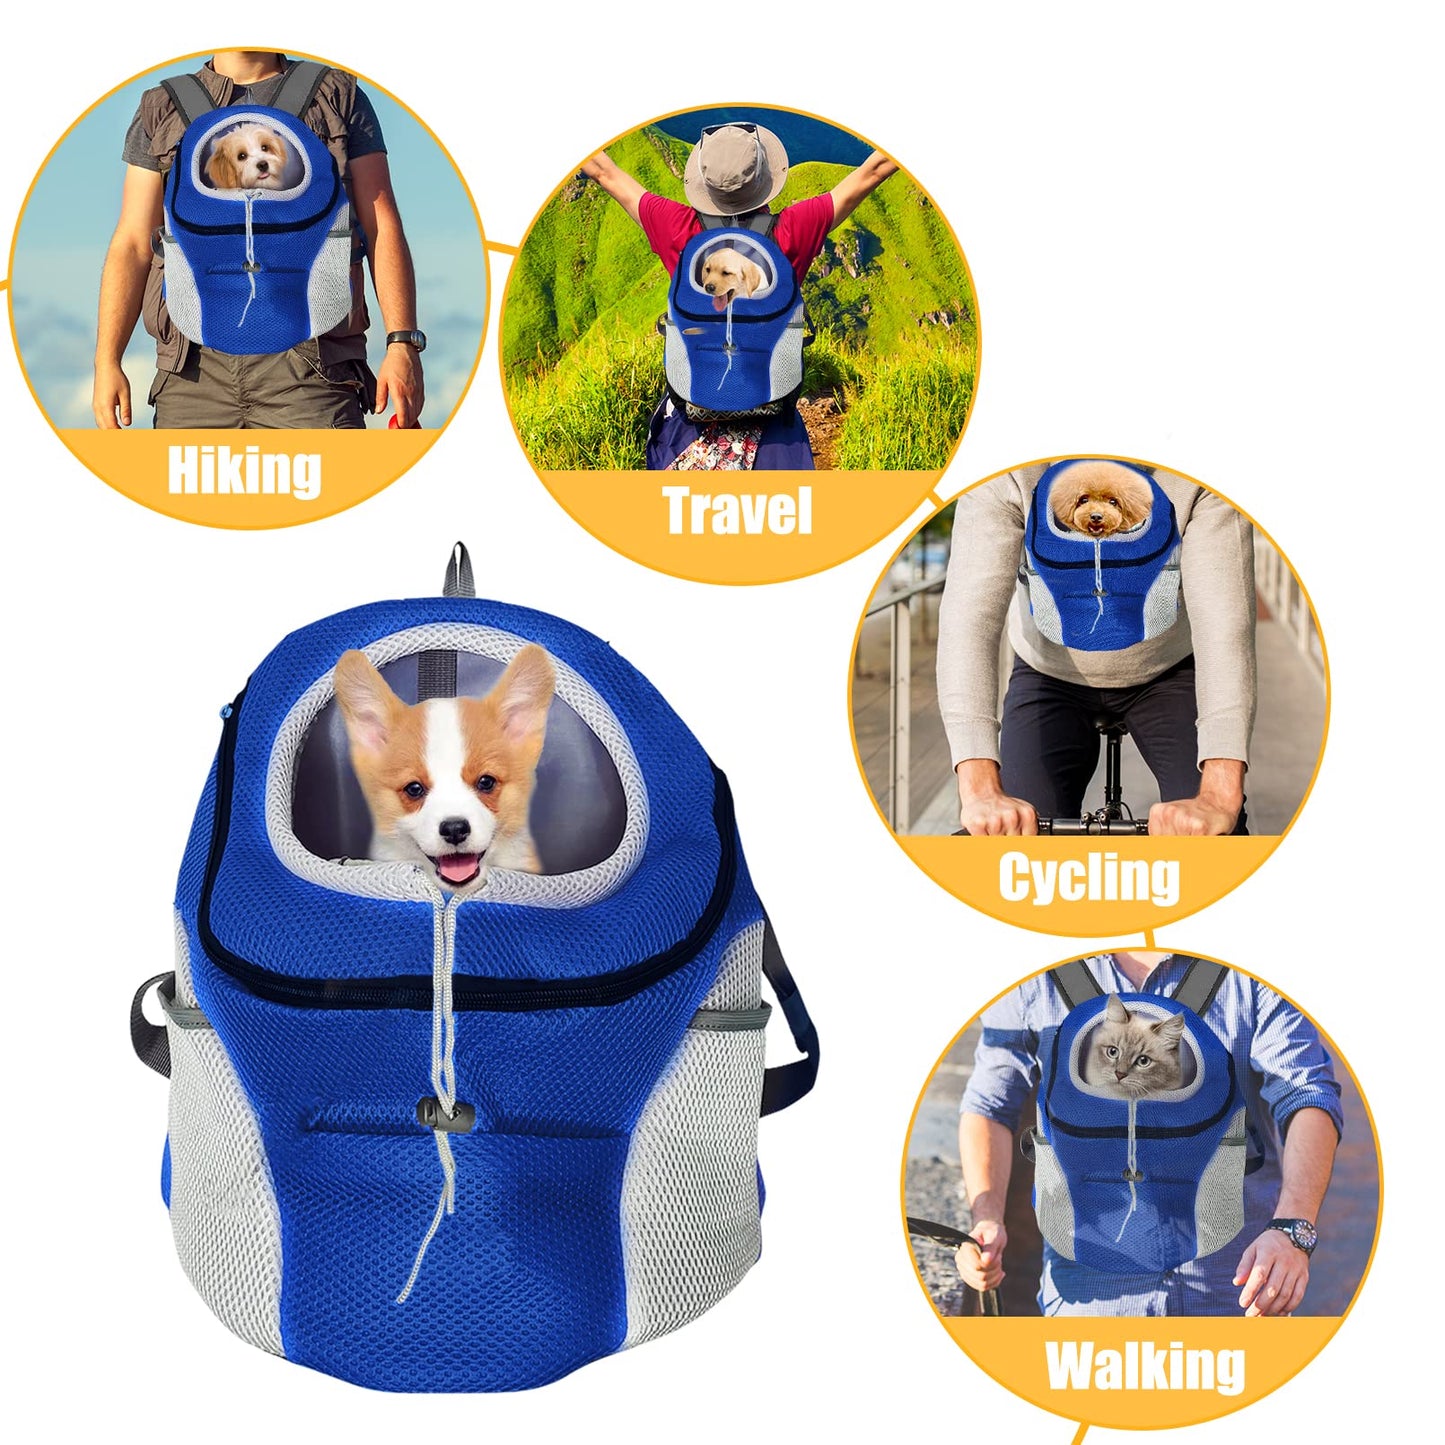 Fhiny Dog Carrier Backpack, Comfortable Doggy Front Backpack Pet Puppy Carrier Travel Pack with Breathable Head Out Design and Padded Shoulder for Walking Biking Hiking Camping Outdoor